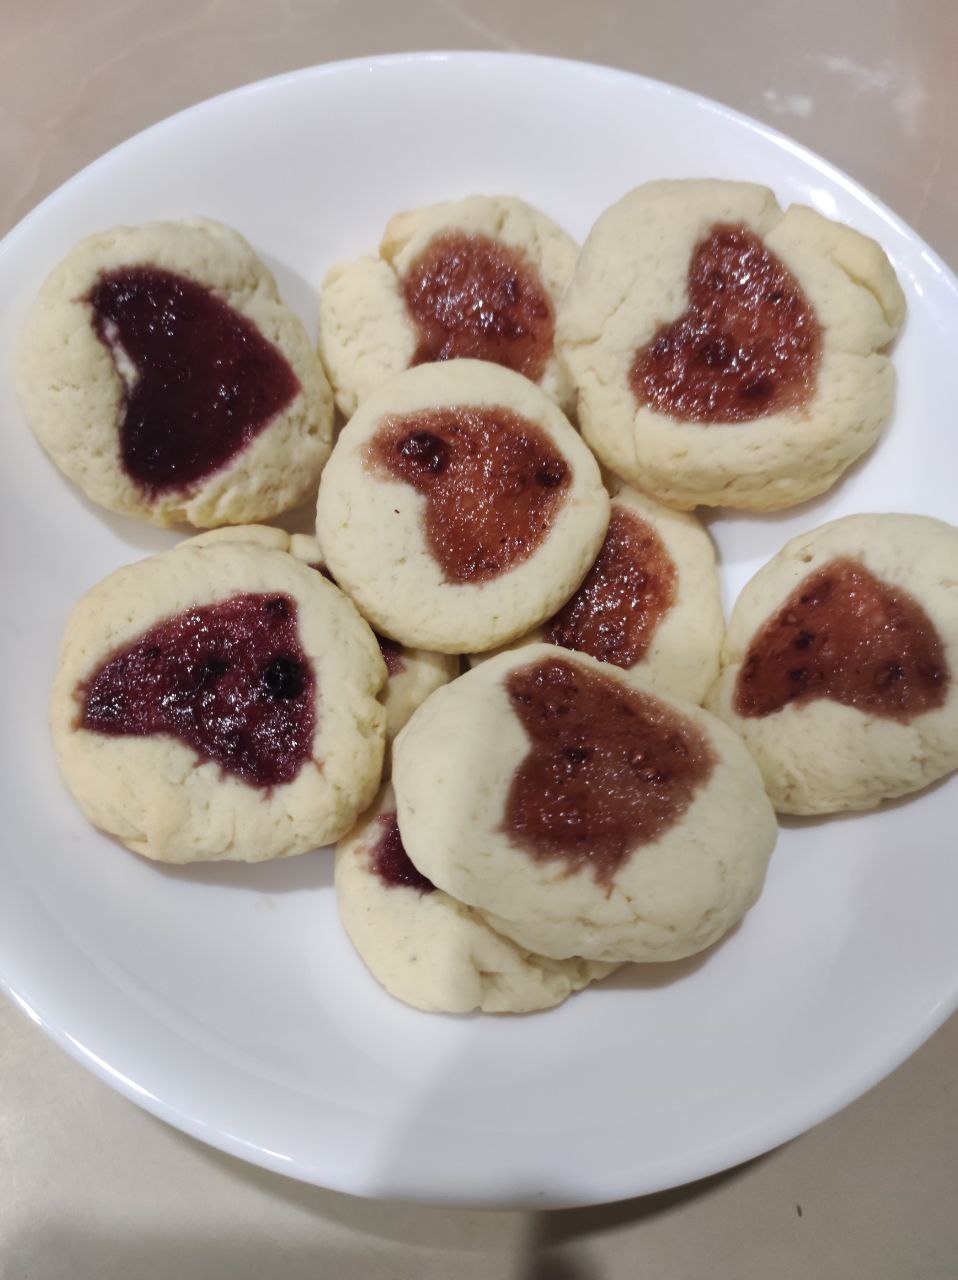 Thumbprint Cookies With Jam Filling